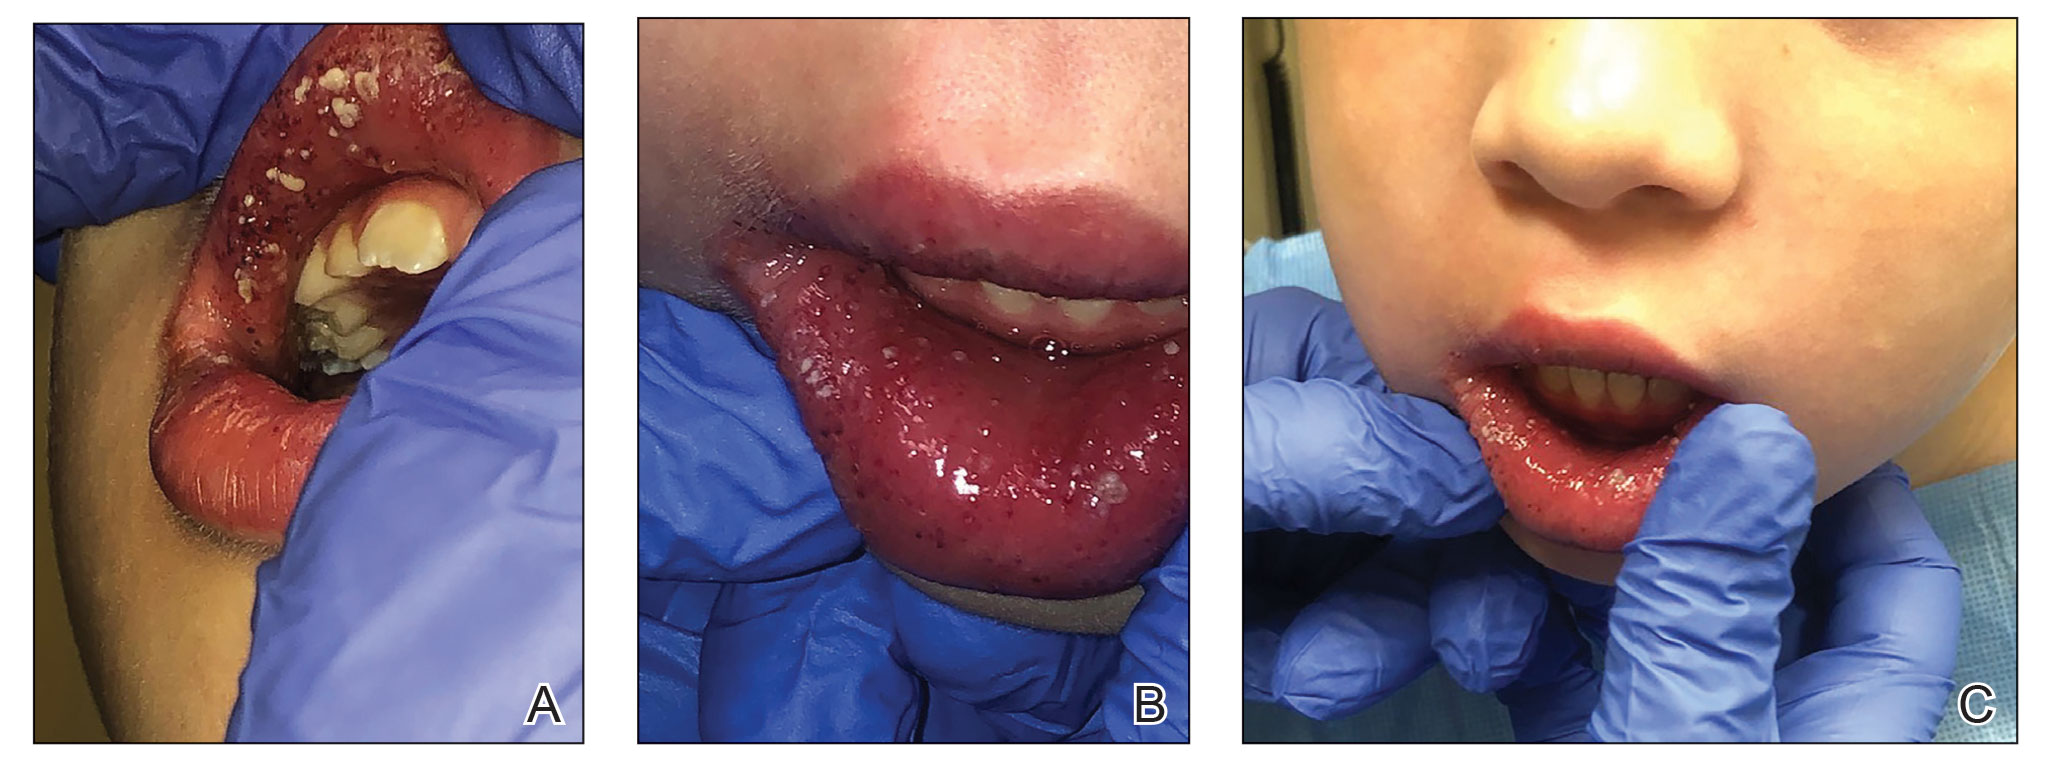 Confluent swelling of the upper and lower labial mucosa with white pustules and plaques over the upper and lower lips in a 7-year-old girl.